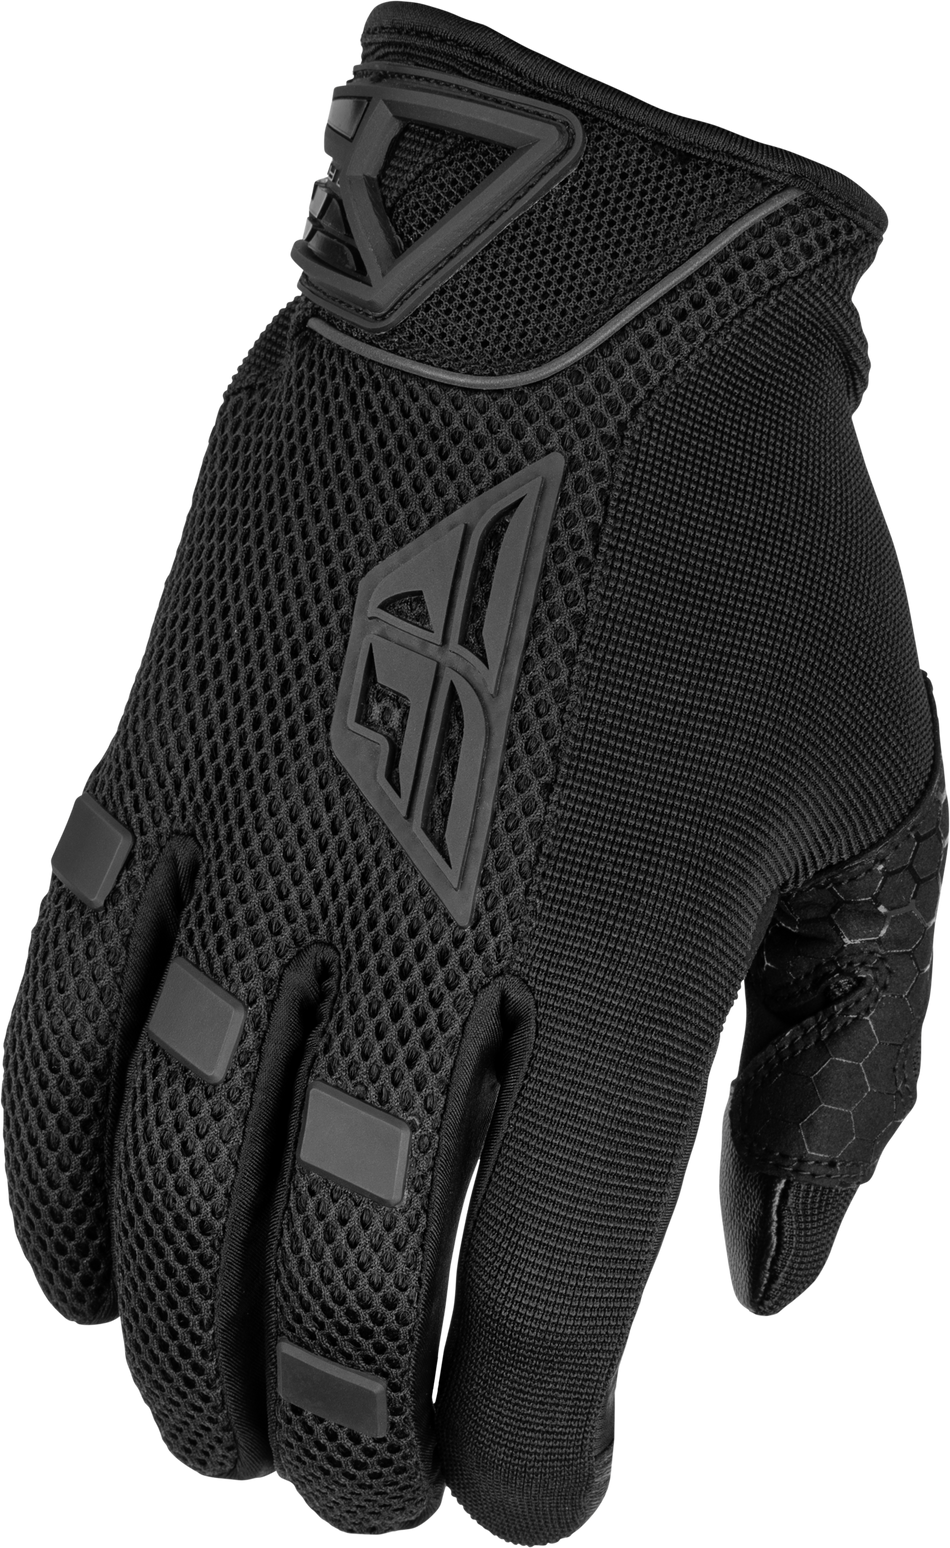 FLY RACING Coolpro Gloves Black Md 476-4024M